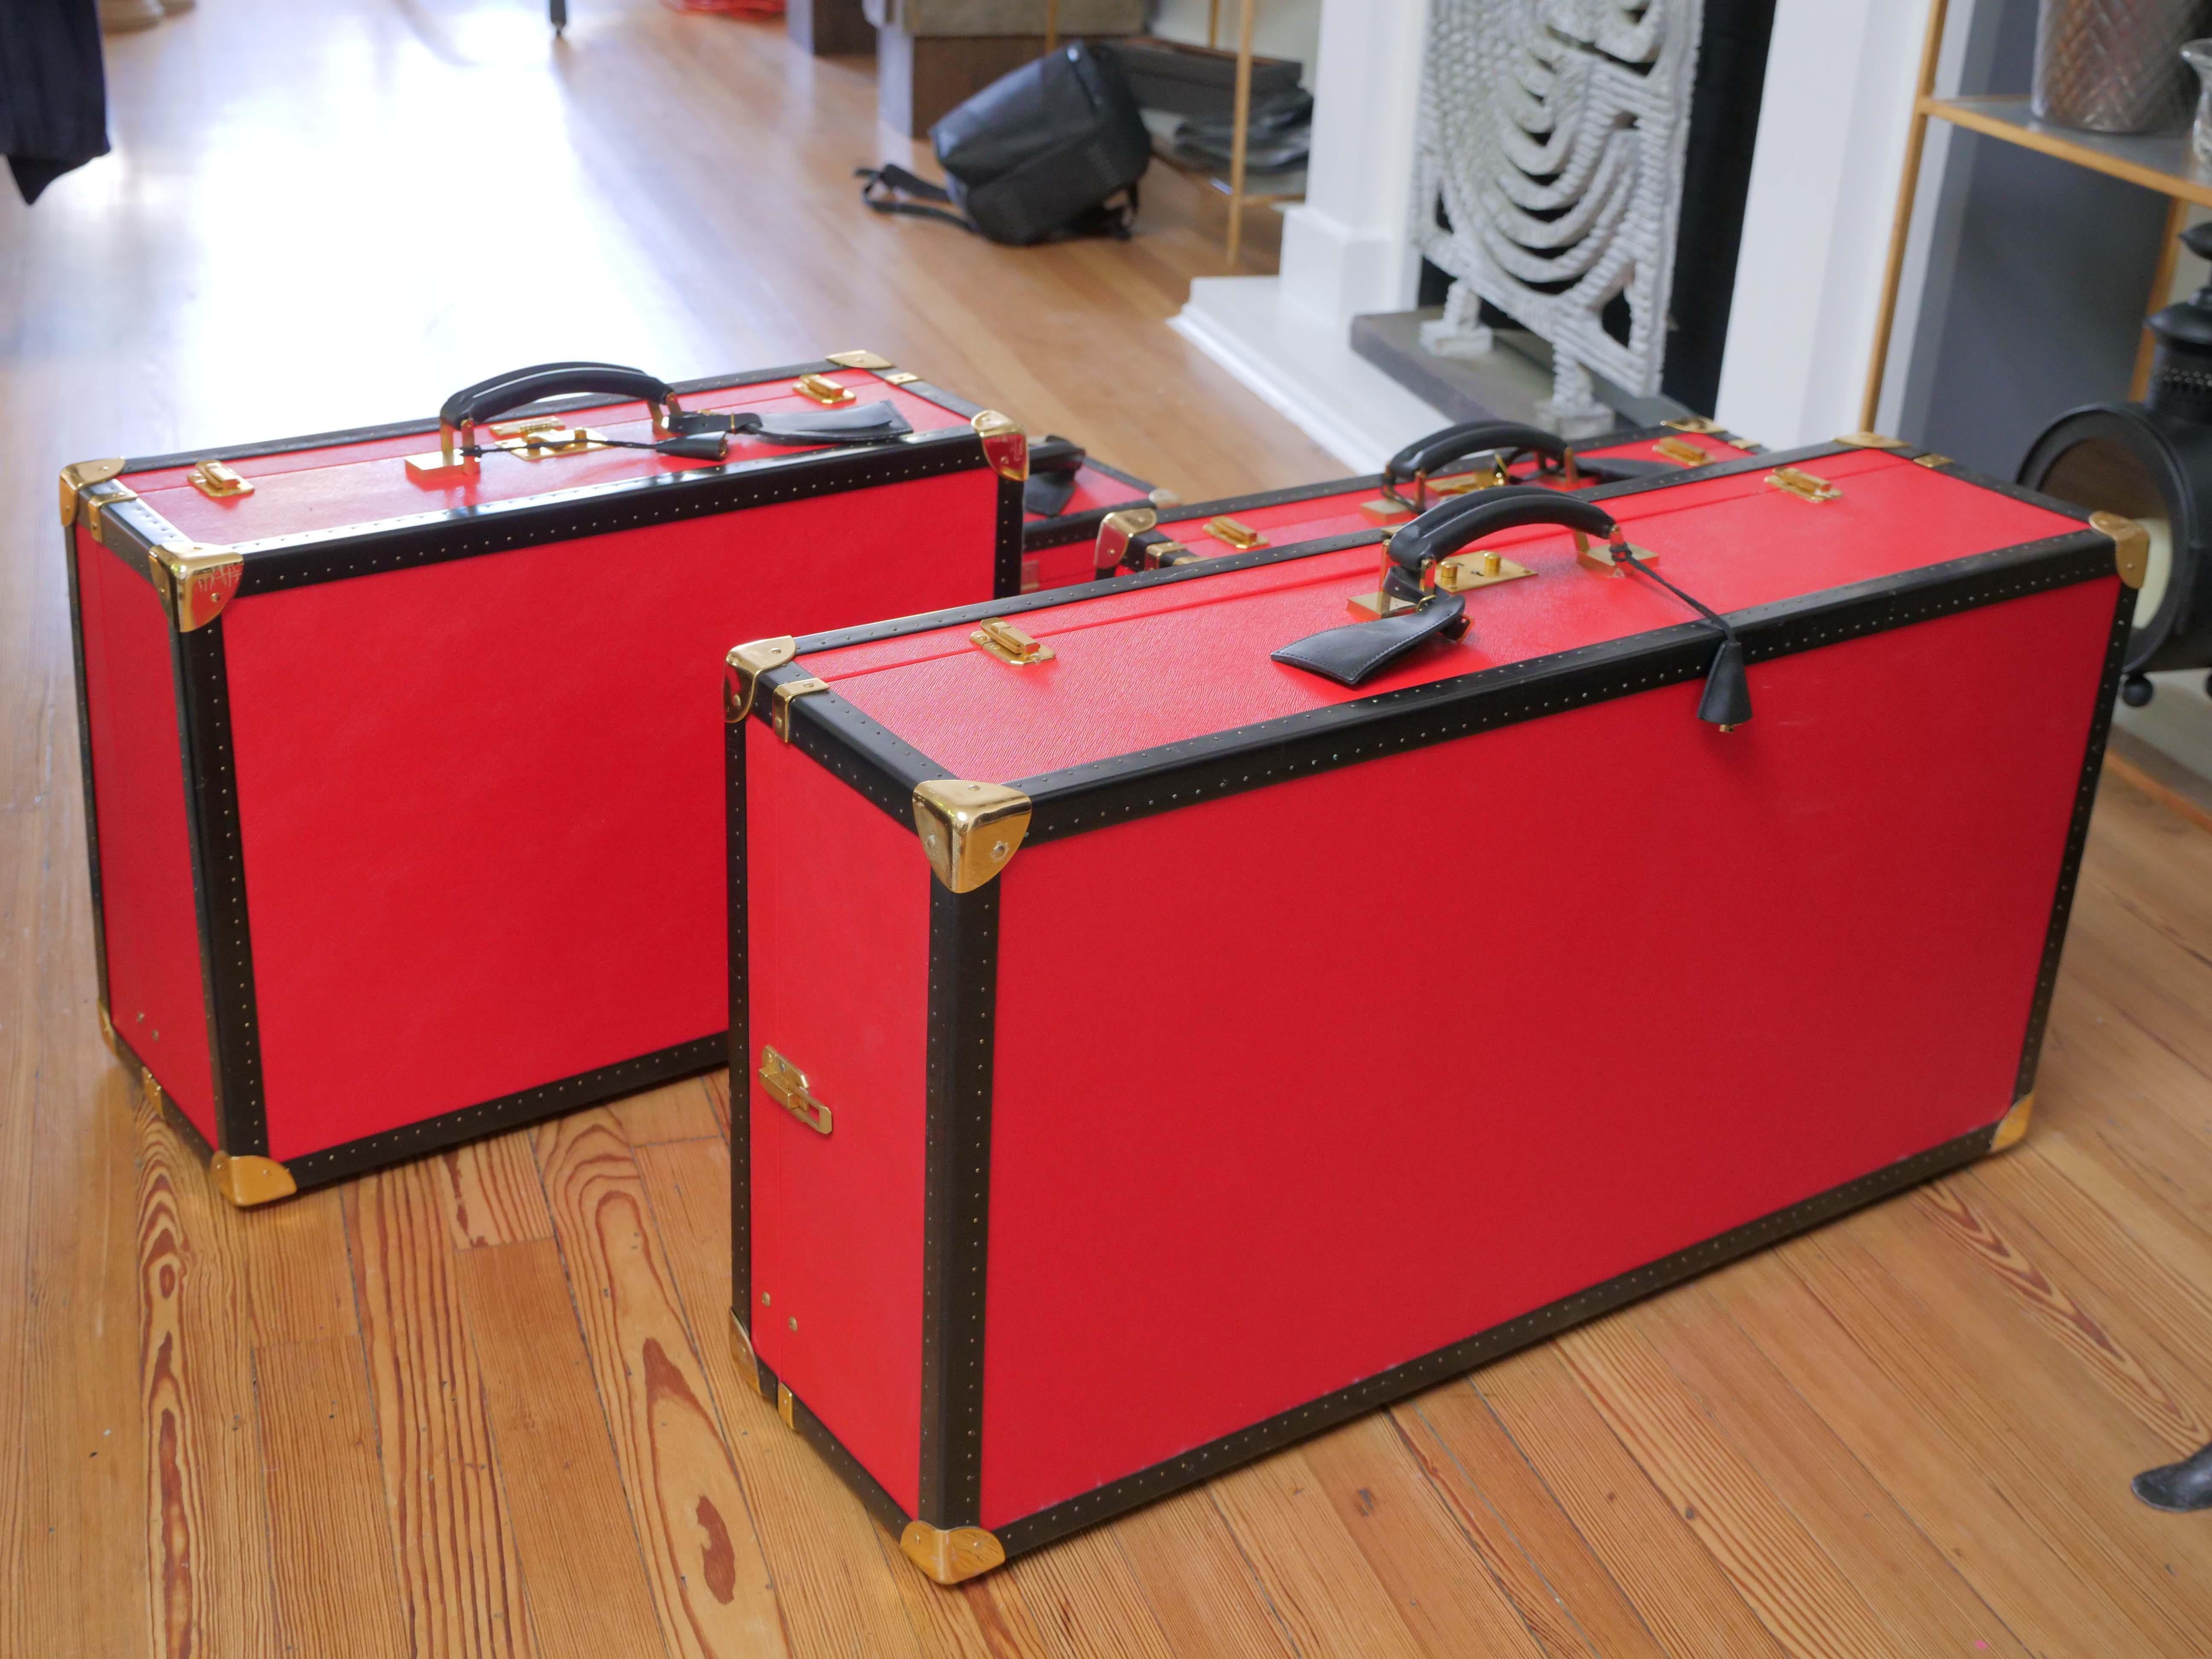 Leather Pascal Morabito Porsche 5-Piece Hard Red Luggage